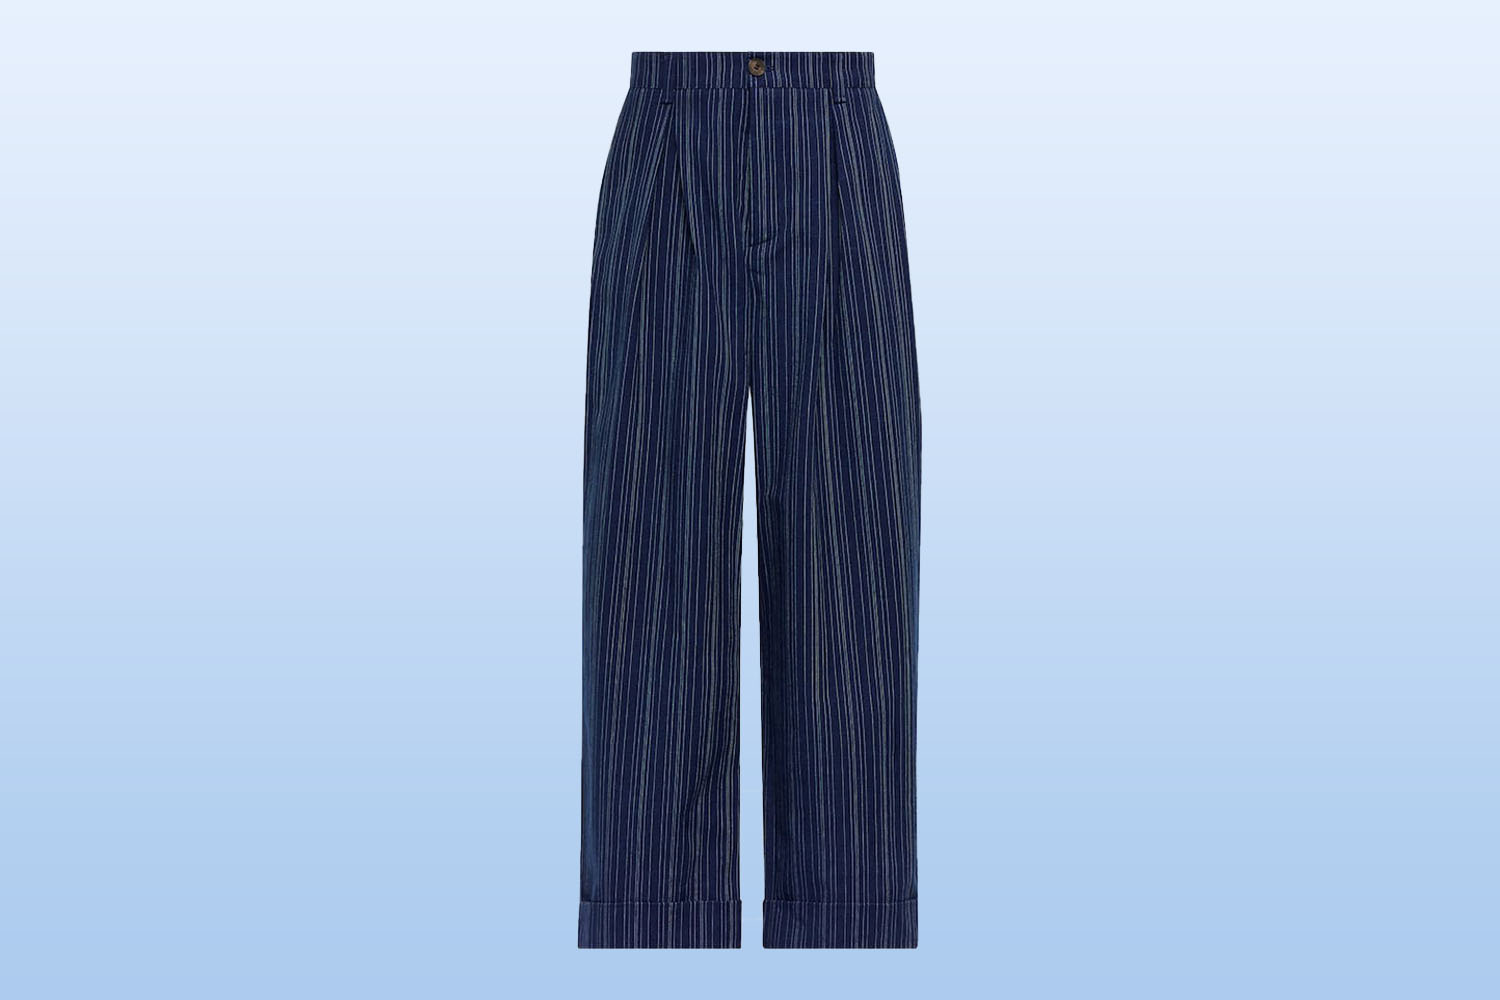 A pair of relaxed blue pants of mytheresa on a light blue background